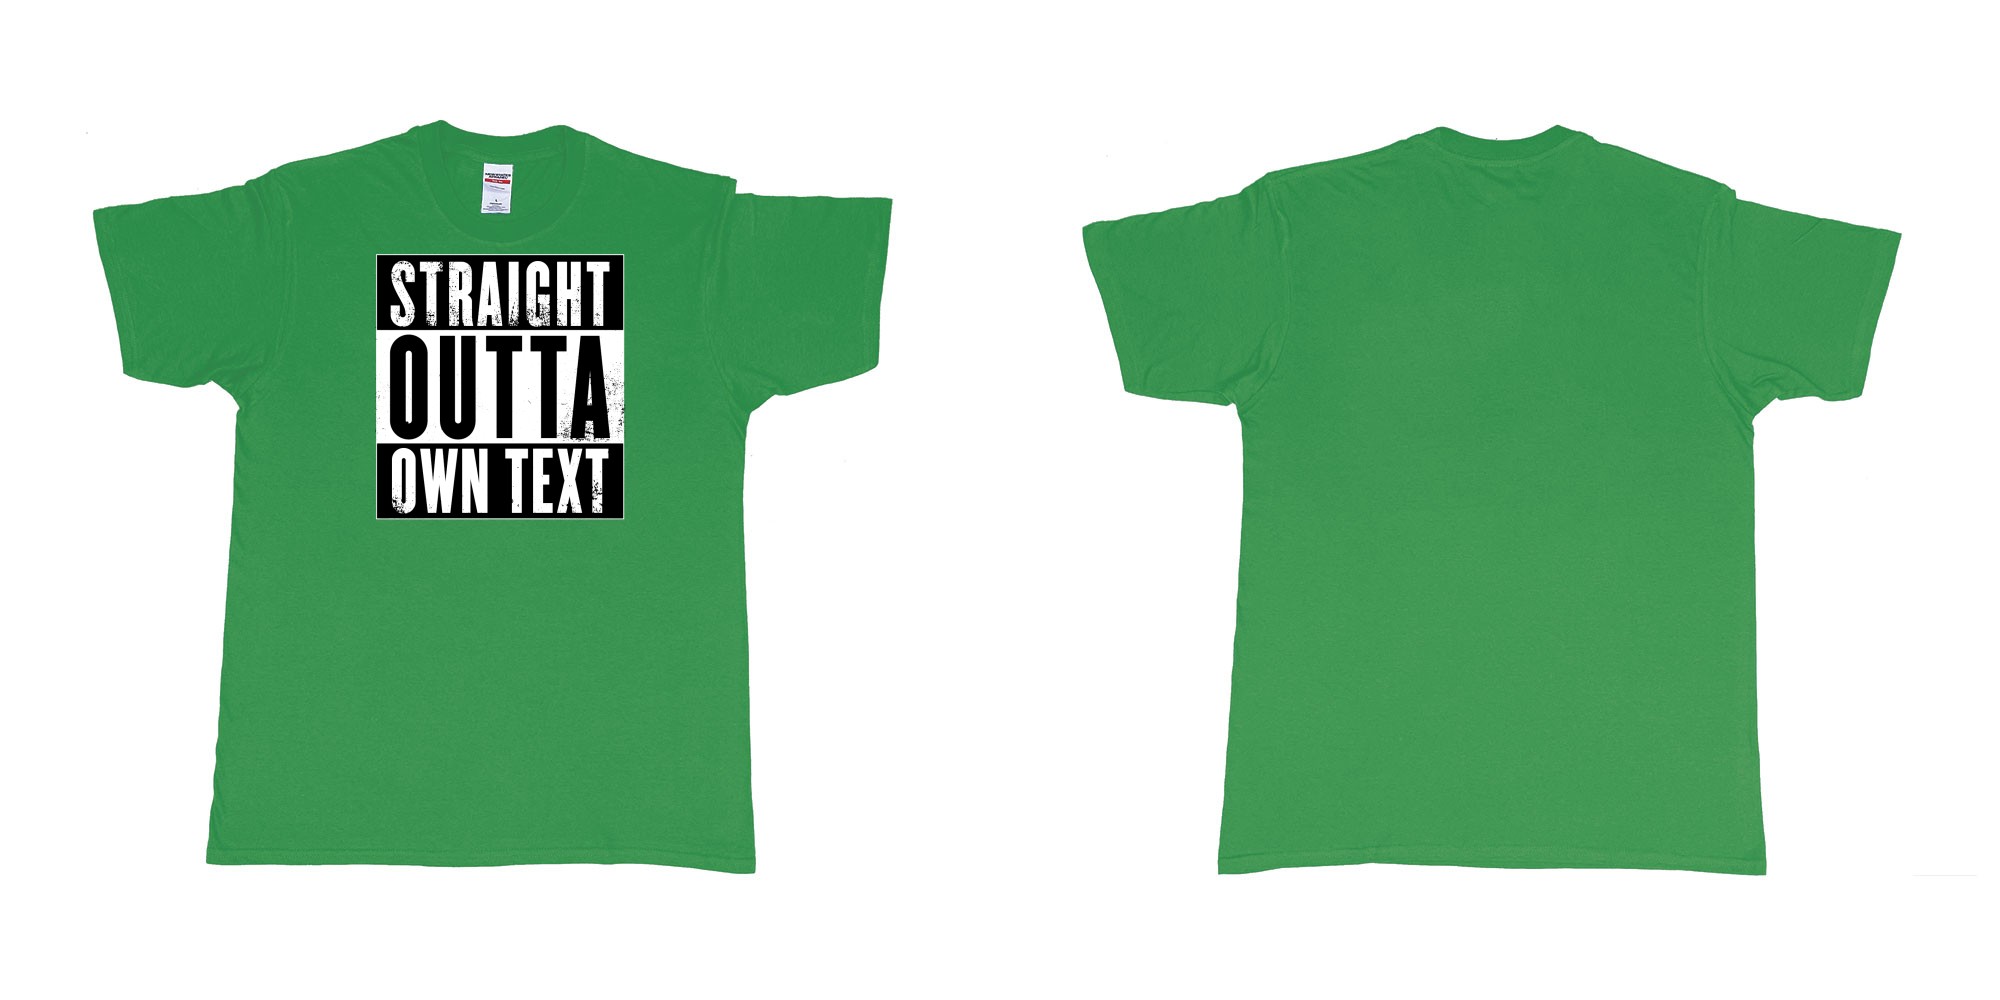 Custom tshirt design Straight Outta Compton in fabric color irish-green choice your own text made in Bali by The Pirate Way